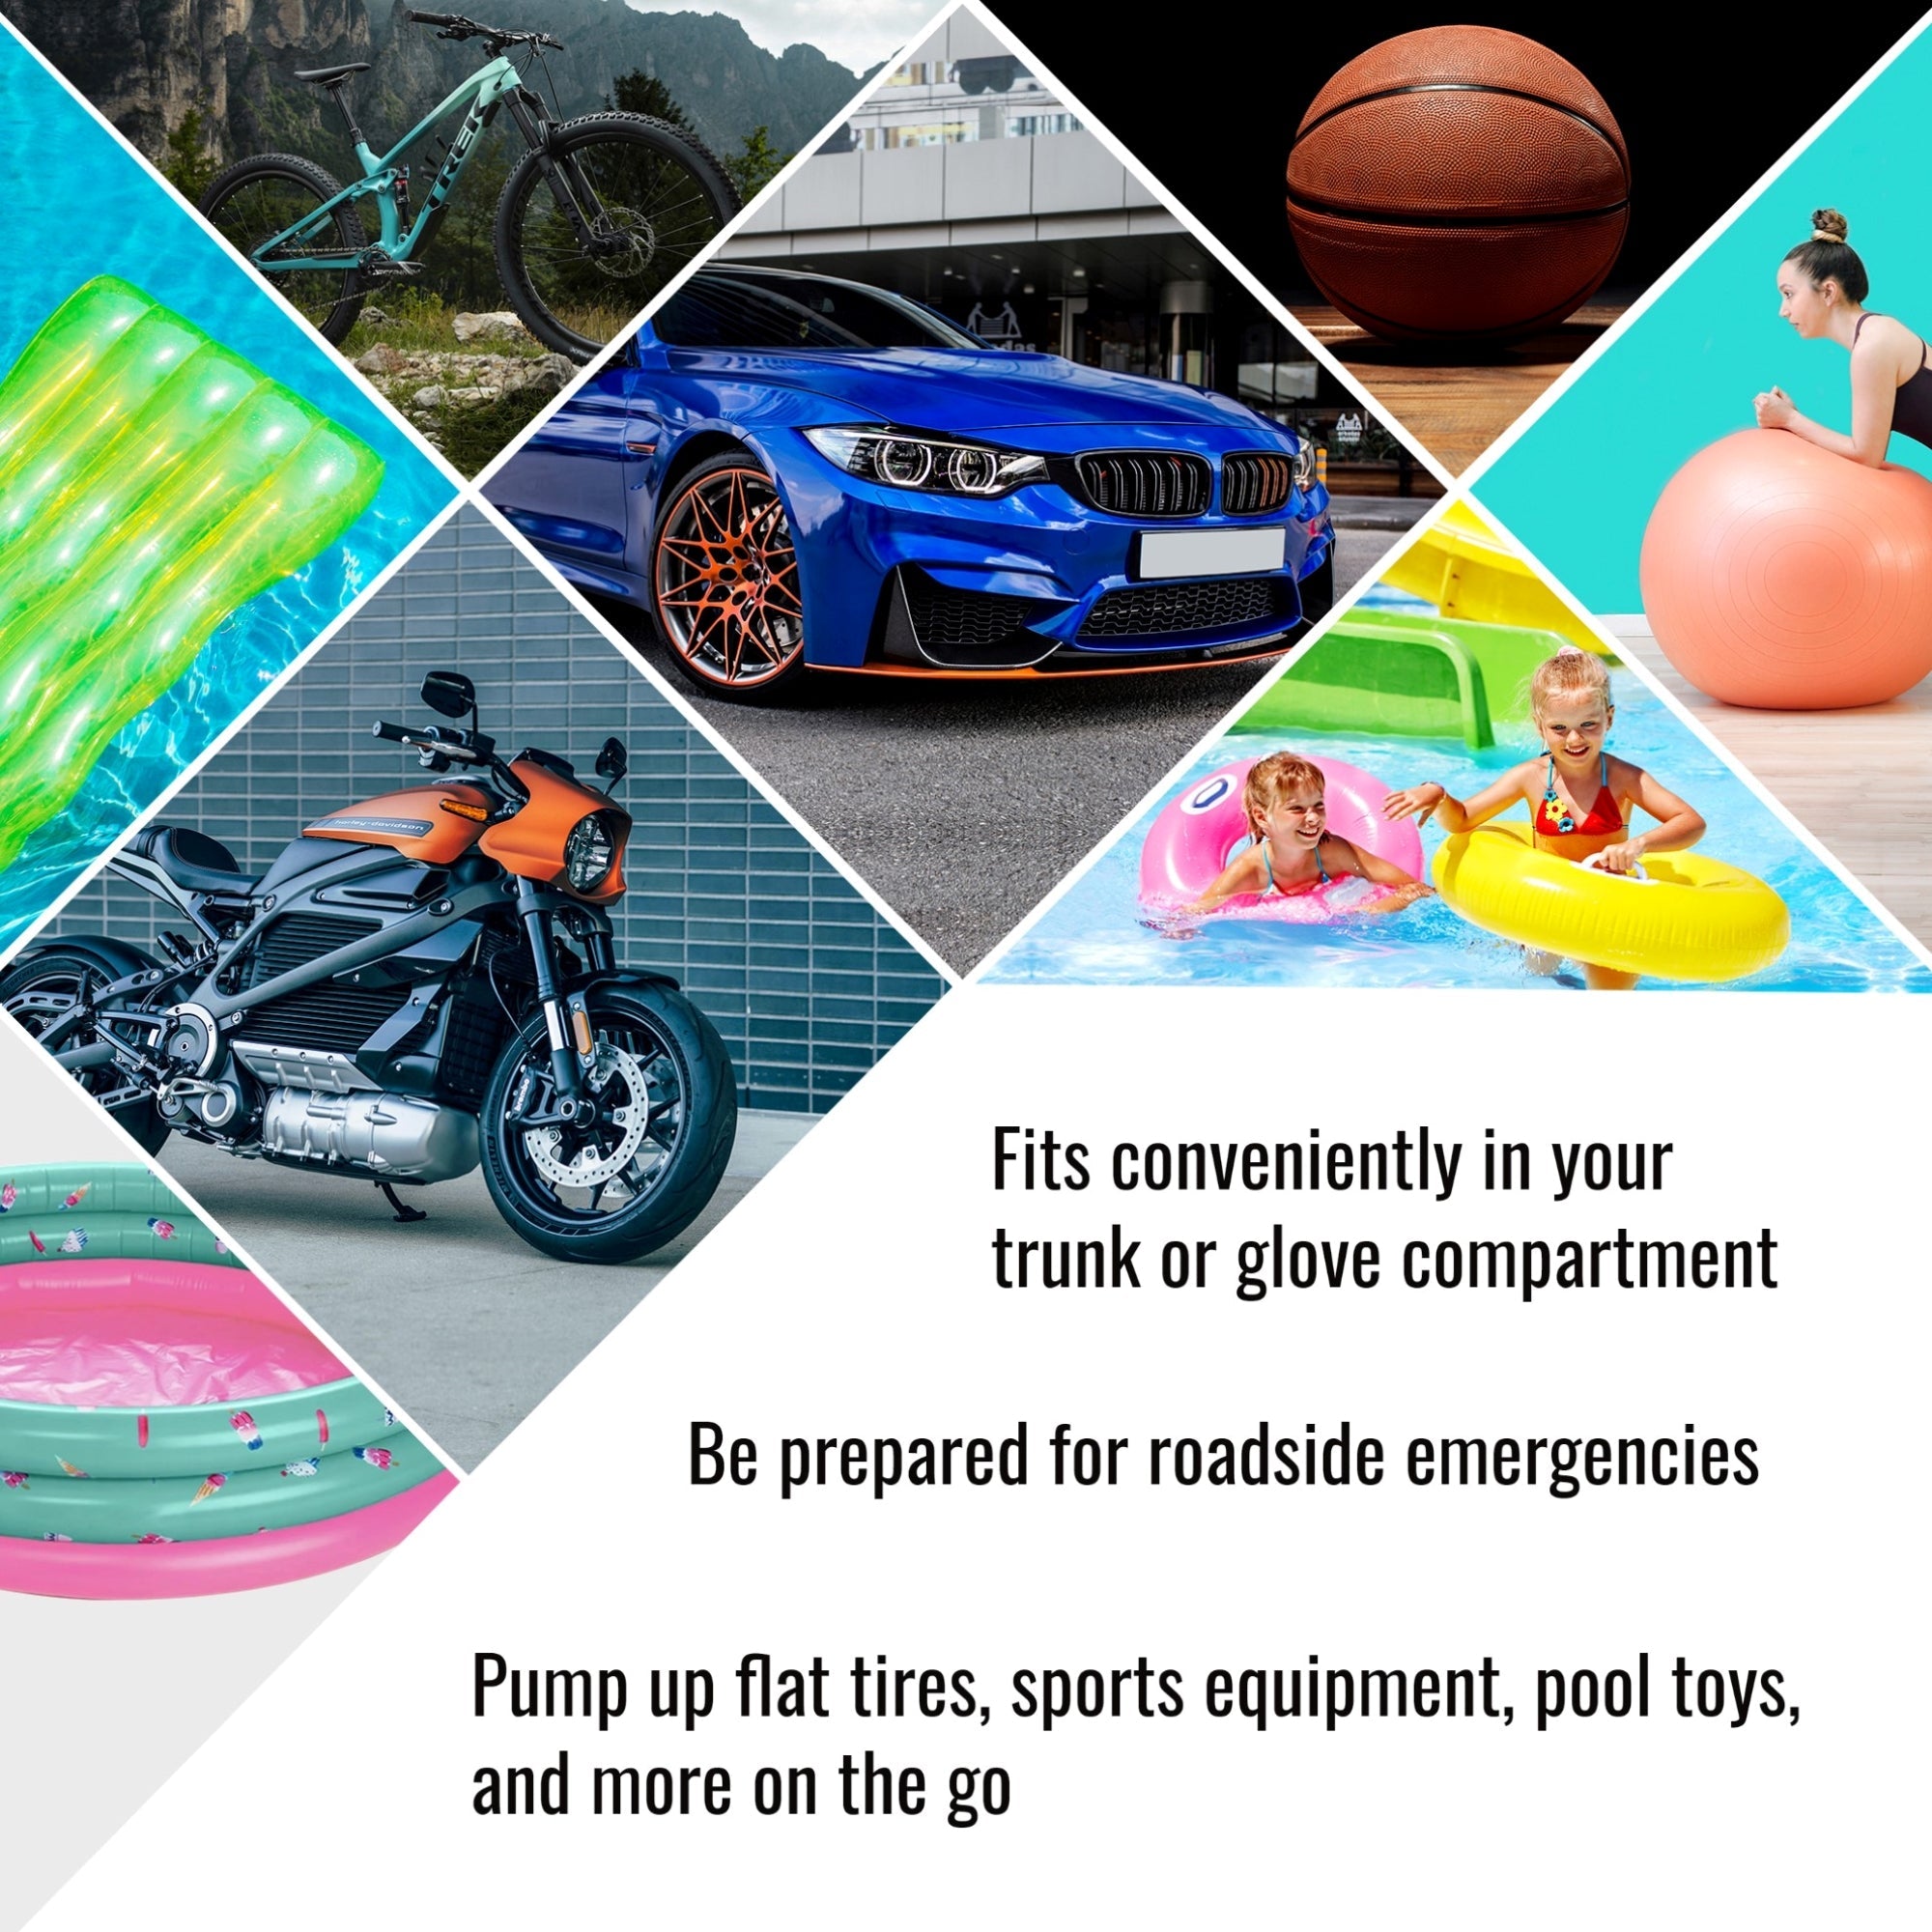 Lifestyle images show various applications for the 12V air compressor: Bicycle, motorcycle, and car tires, basketball, exercise ball, pool toys, and wading pool. Text below reads, "Fits conveniently in your trunk or glove compartment; Be prepared for roadside emergencies; Pump up flat tires, sports equipment, pool toys, and more on the go"